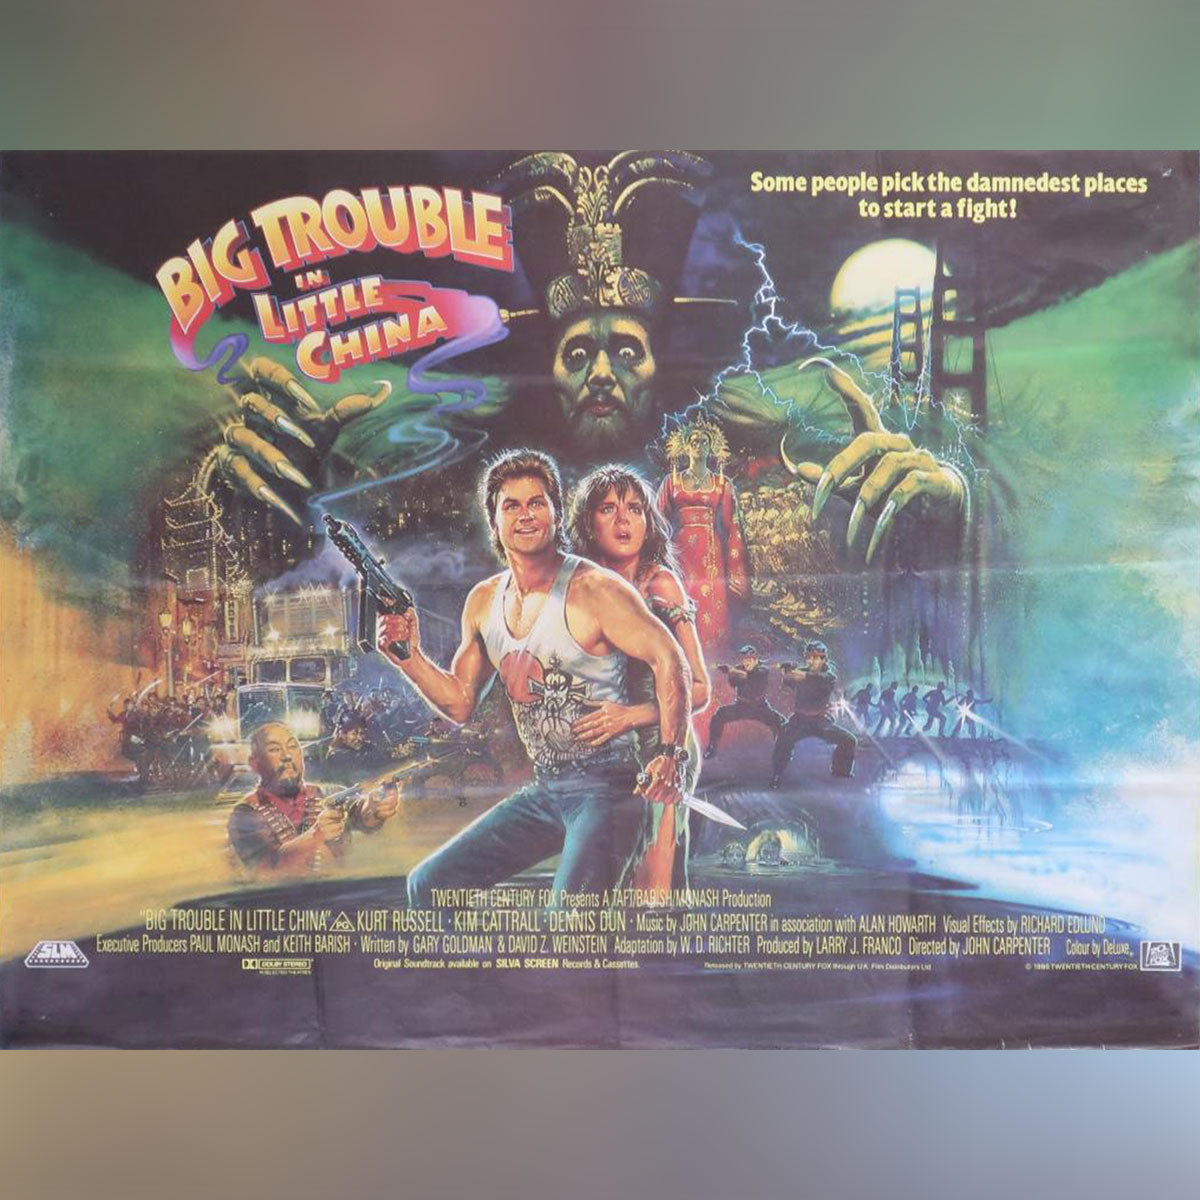 Big Trouble In Little China (1986)